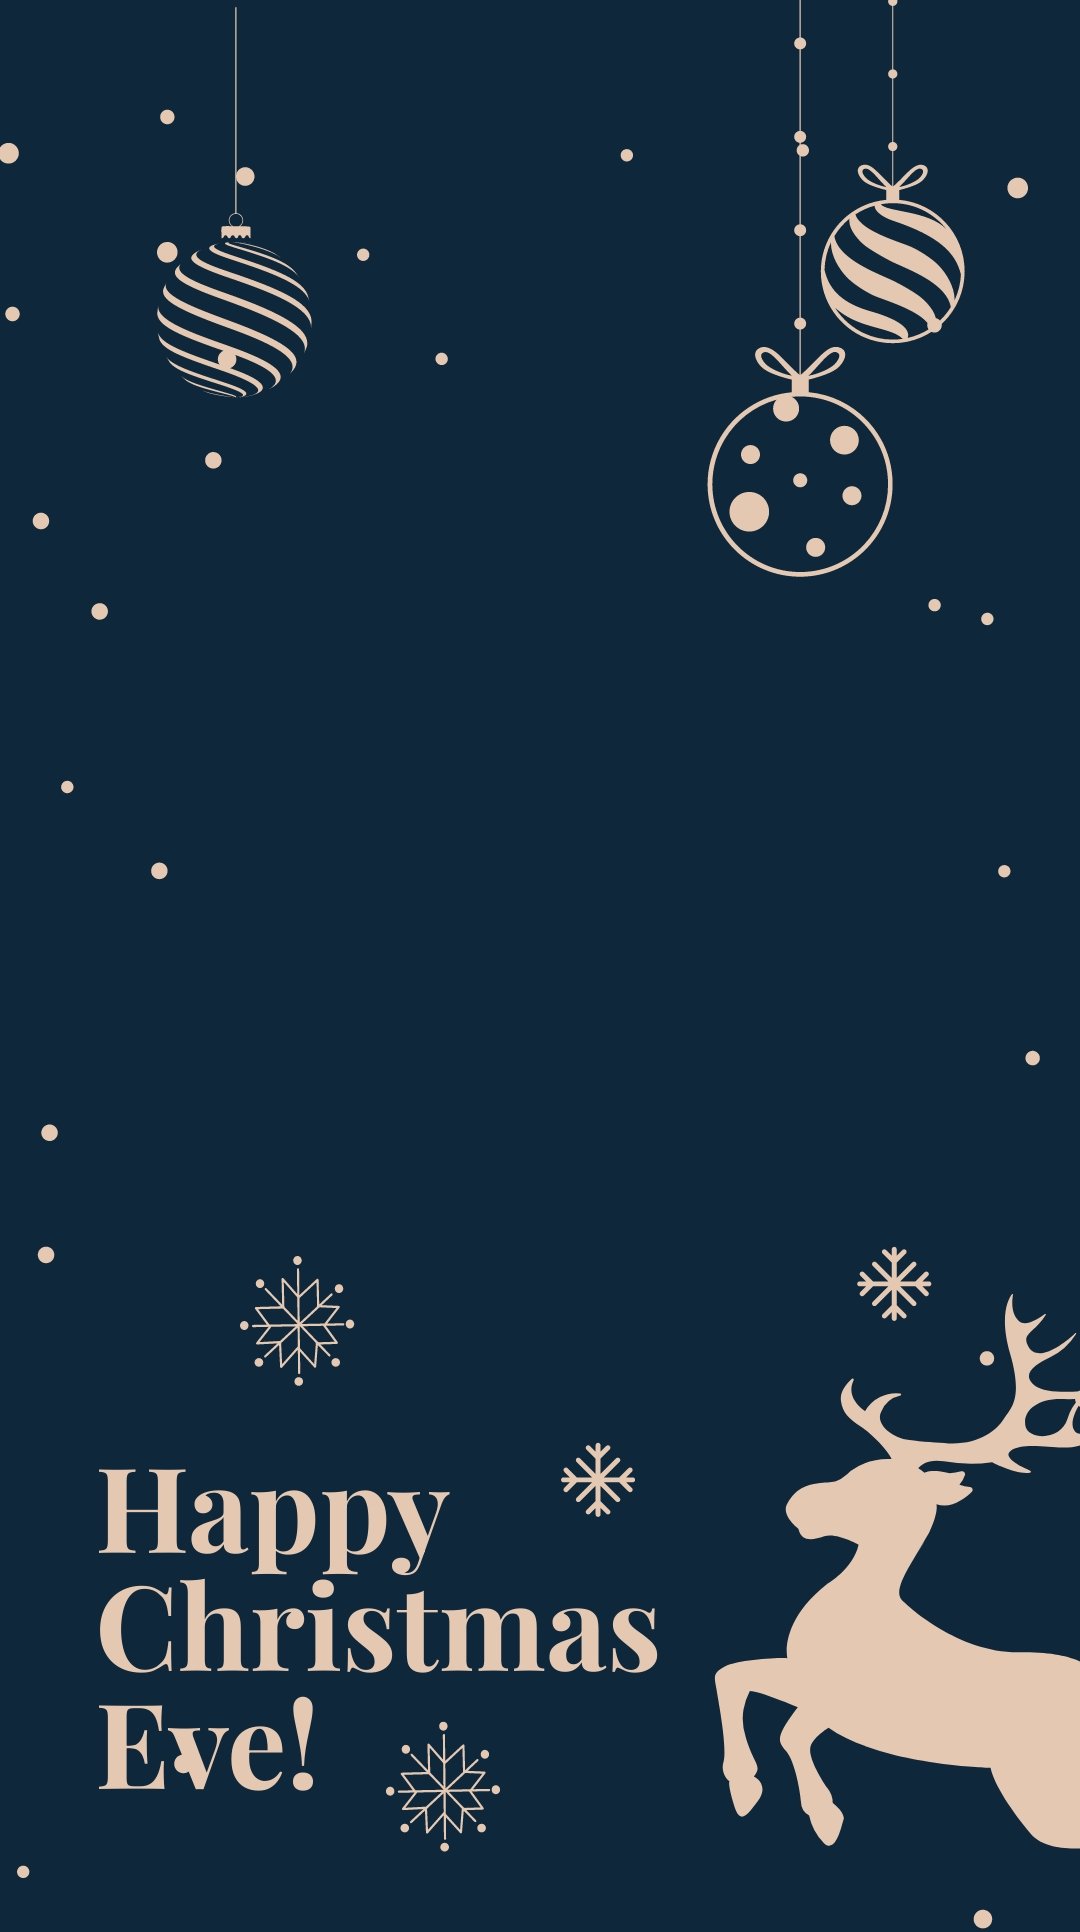 Christmas Eve Snapchat Geofilter Template